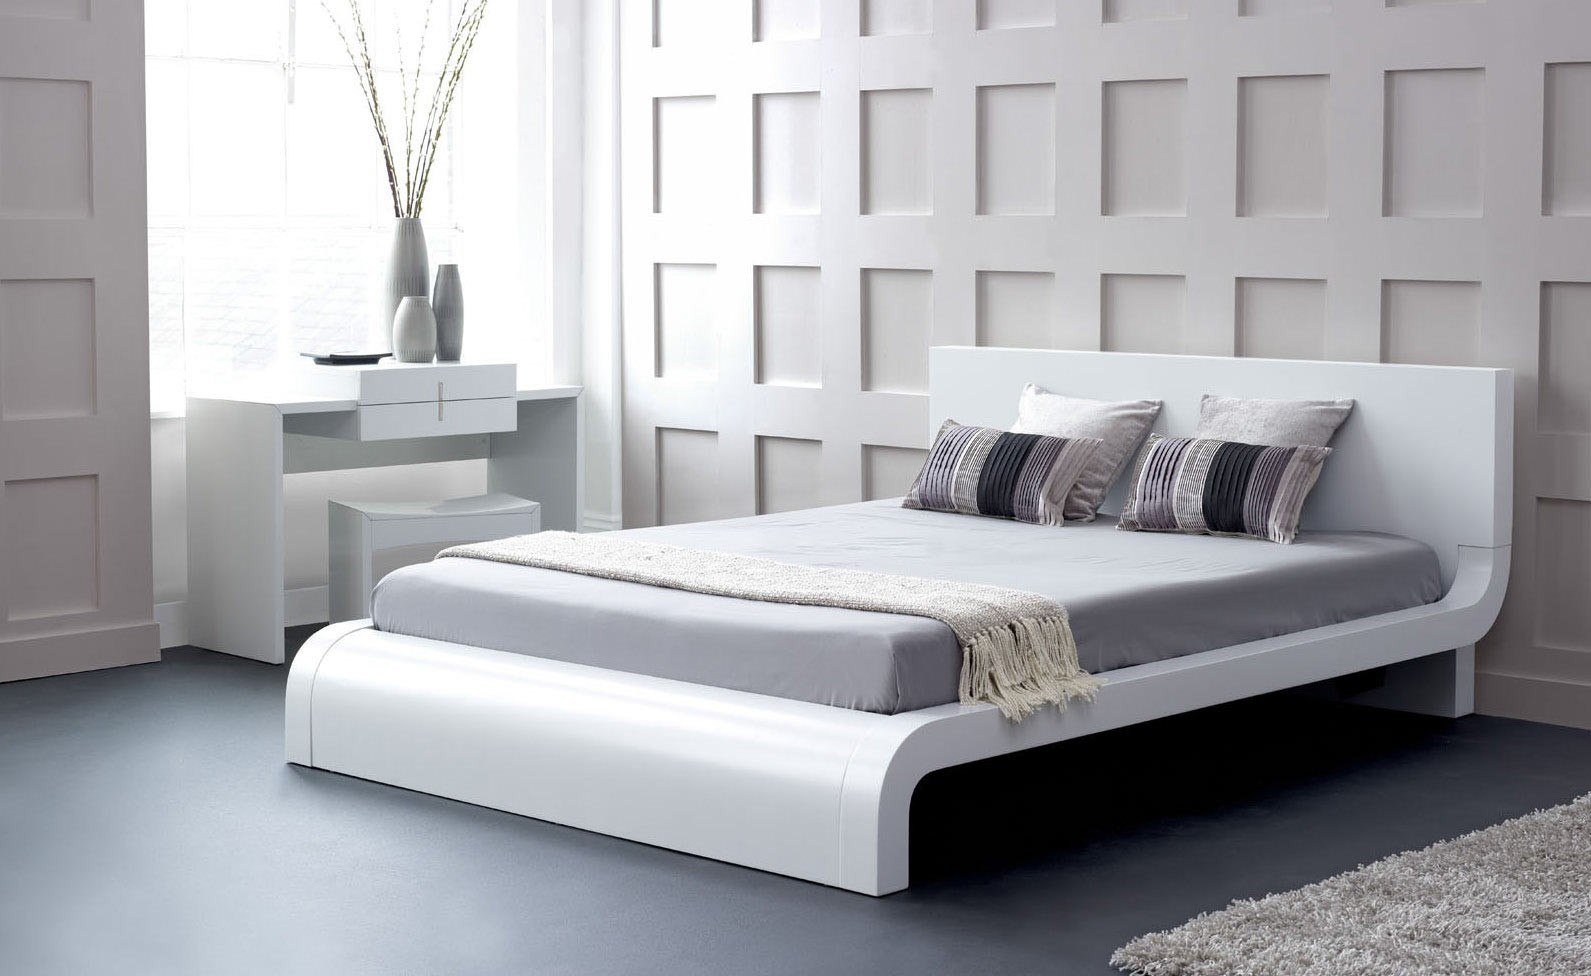 20 Very Cool Modern Beds For Your Room